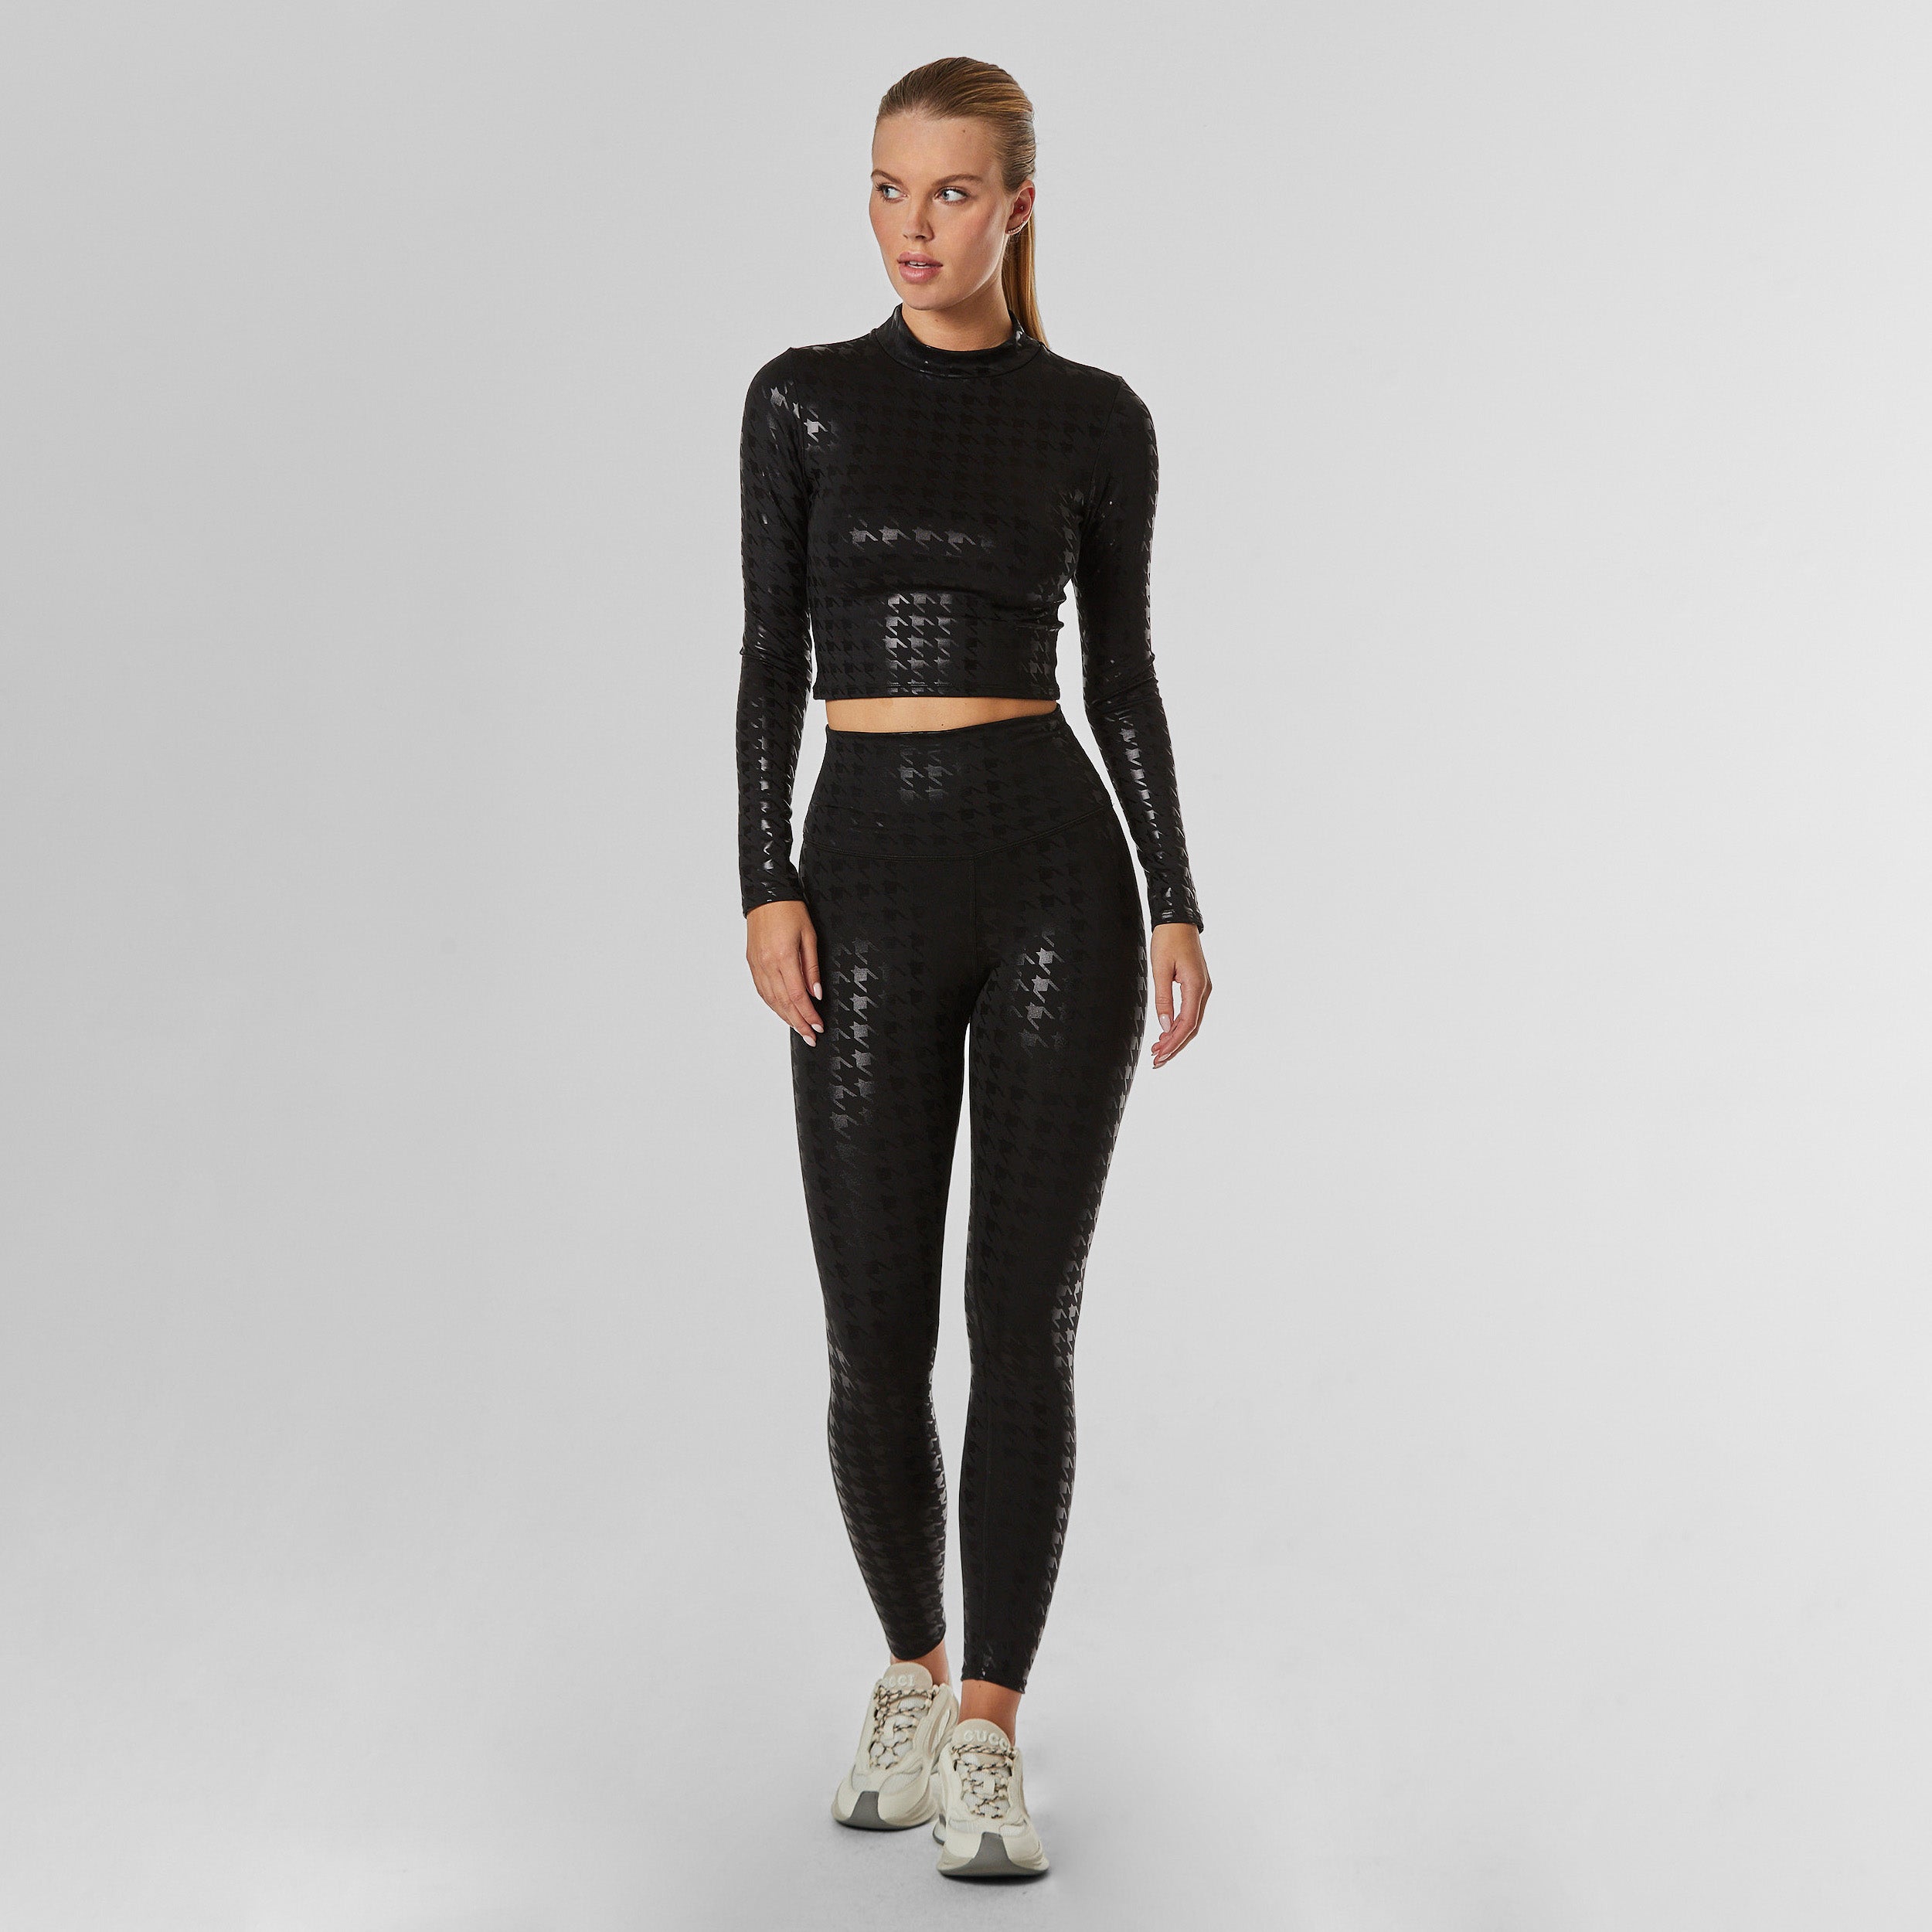 Full body view of black on black houndstooth Long Sleeve top and matching legging